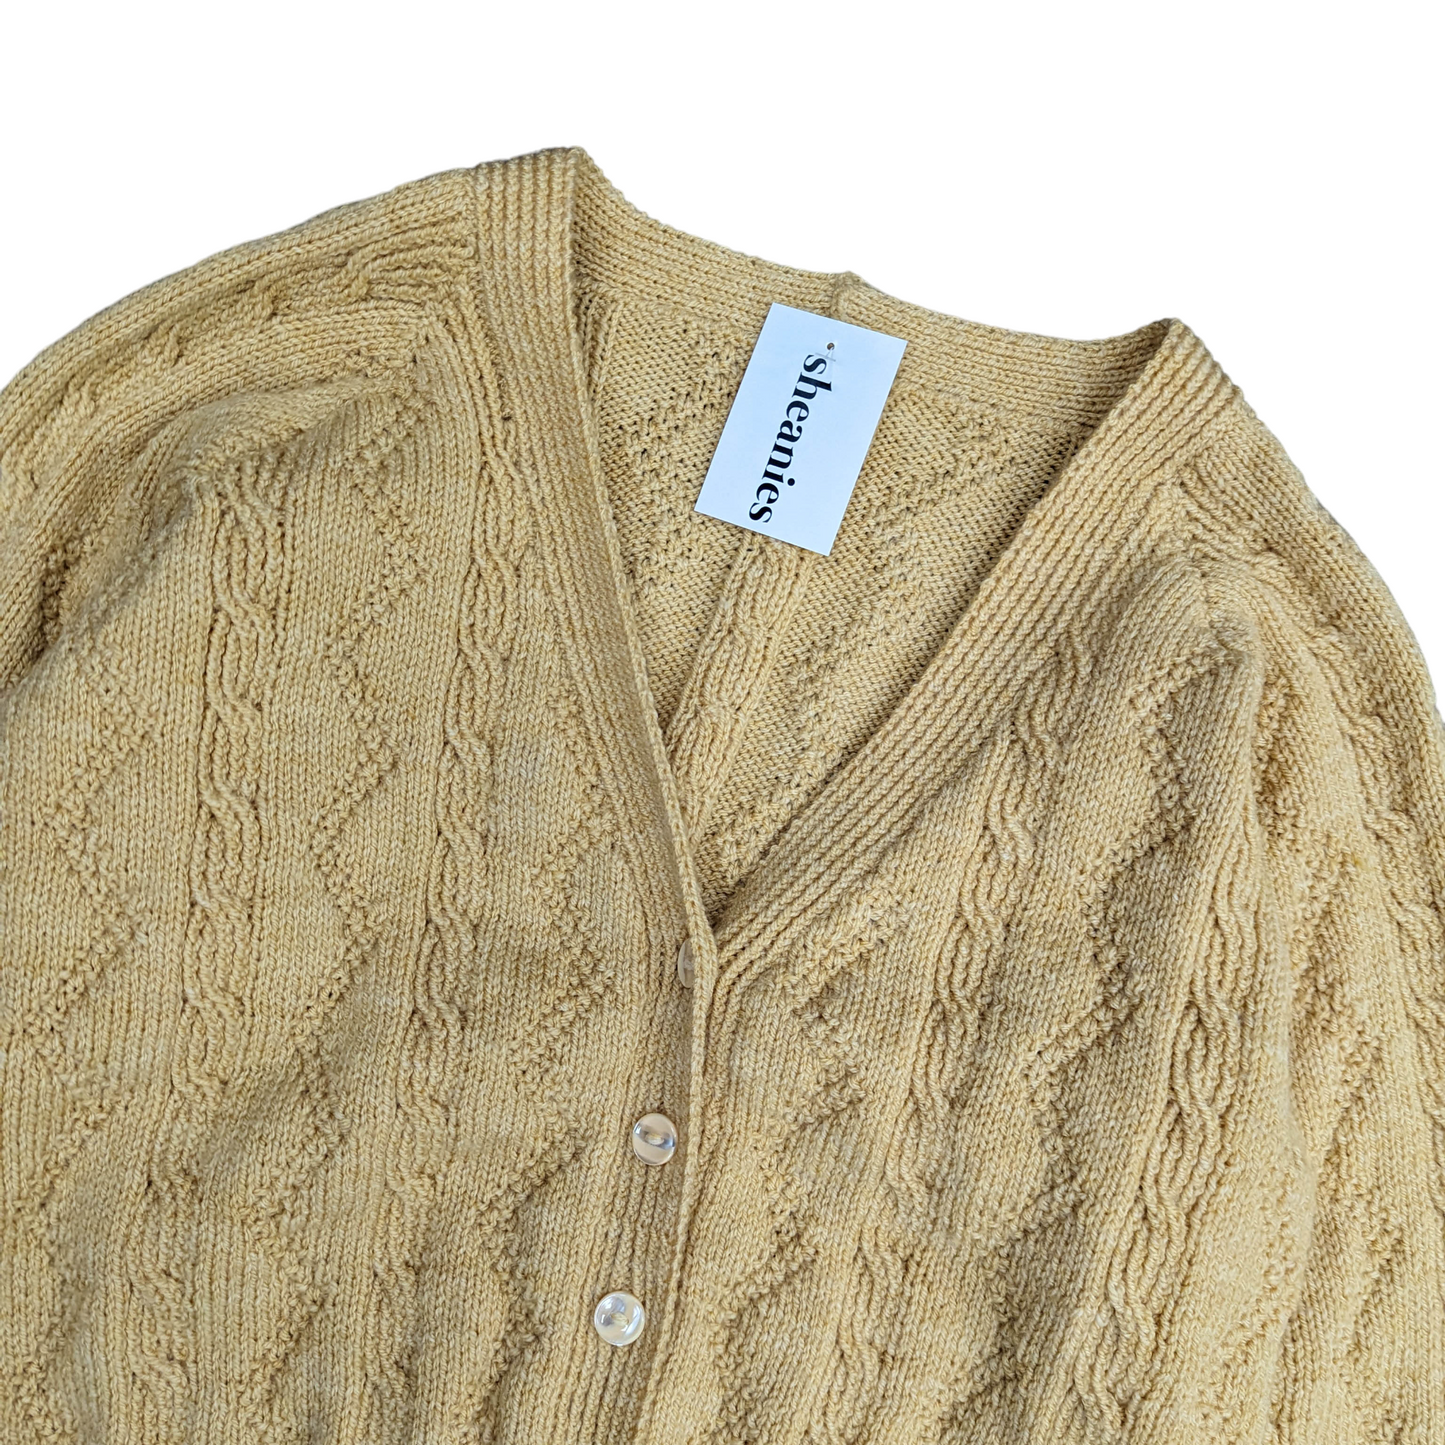 Vintage Knitted Cardigan Women's Size M